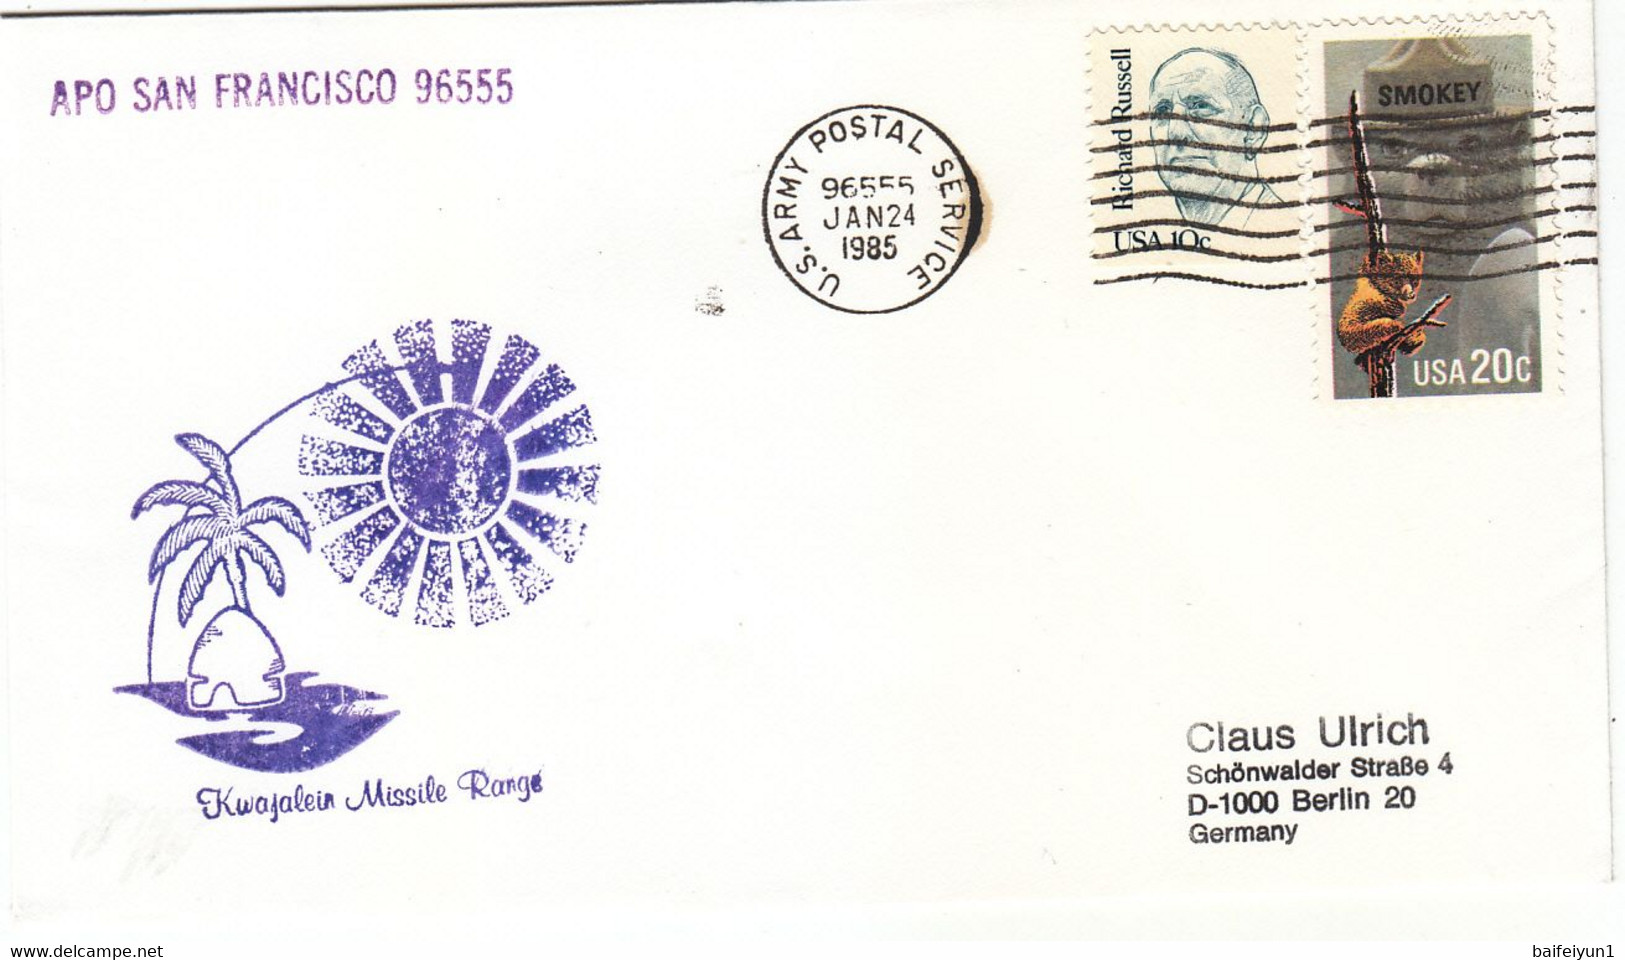 1985 USA  Space Shuttle Discovery STS-51C Mission And  Missile Range Commemorative Cover - Noord-Amerika